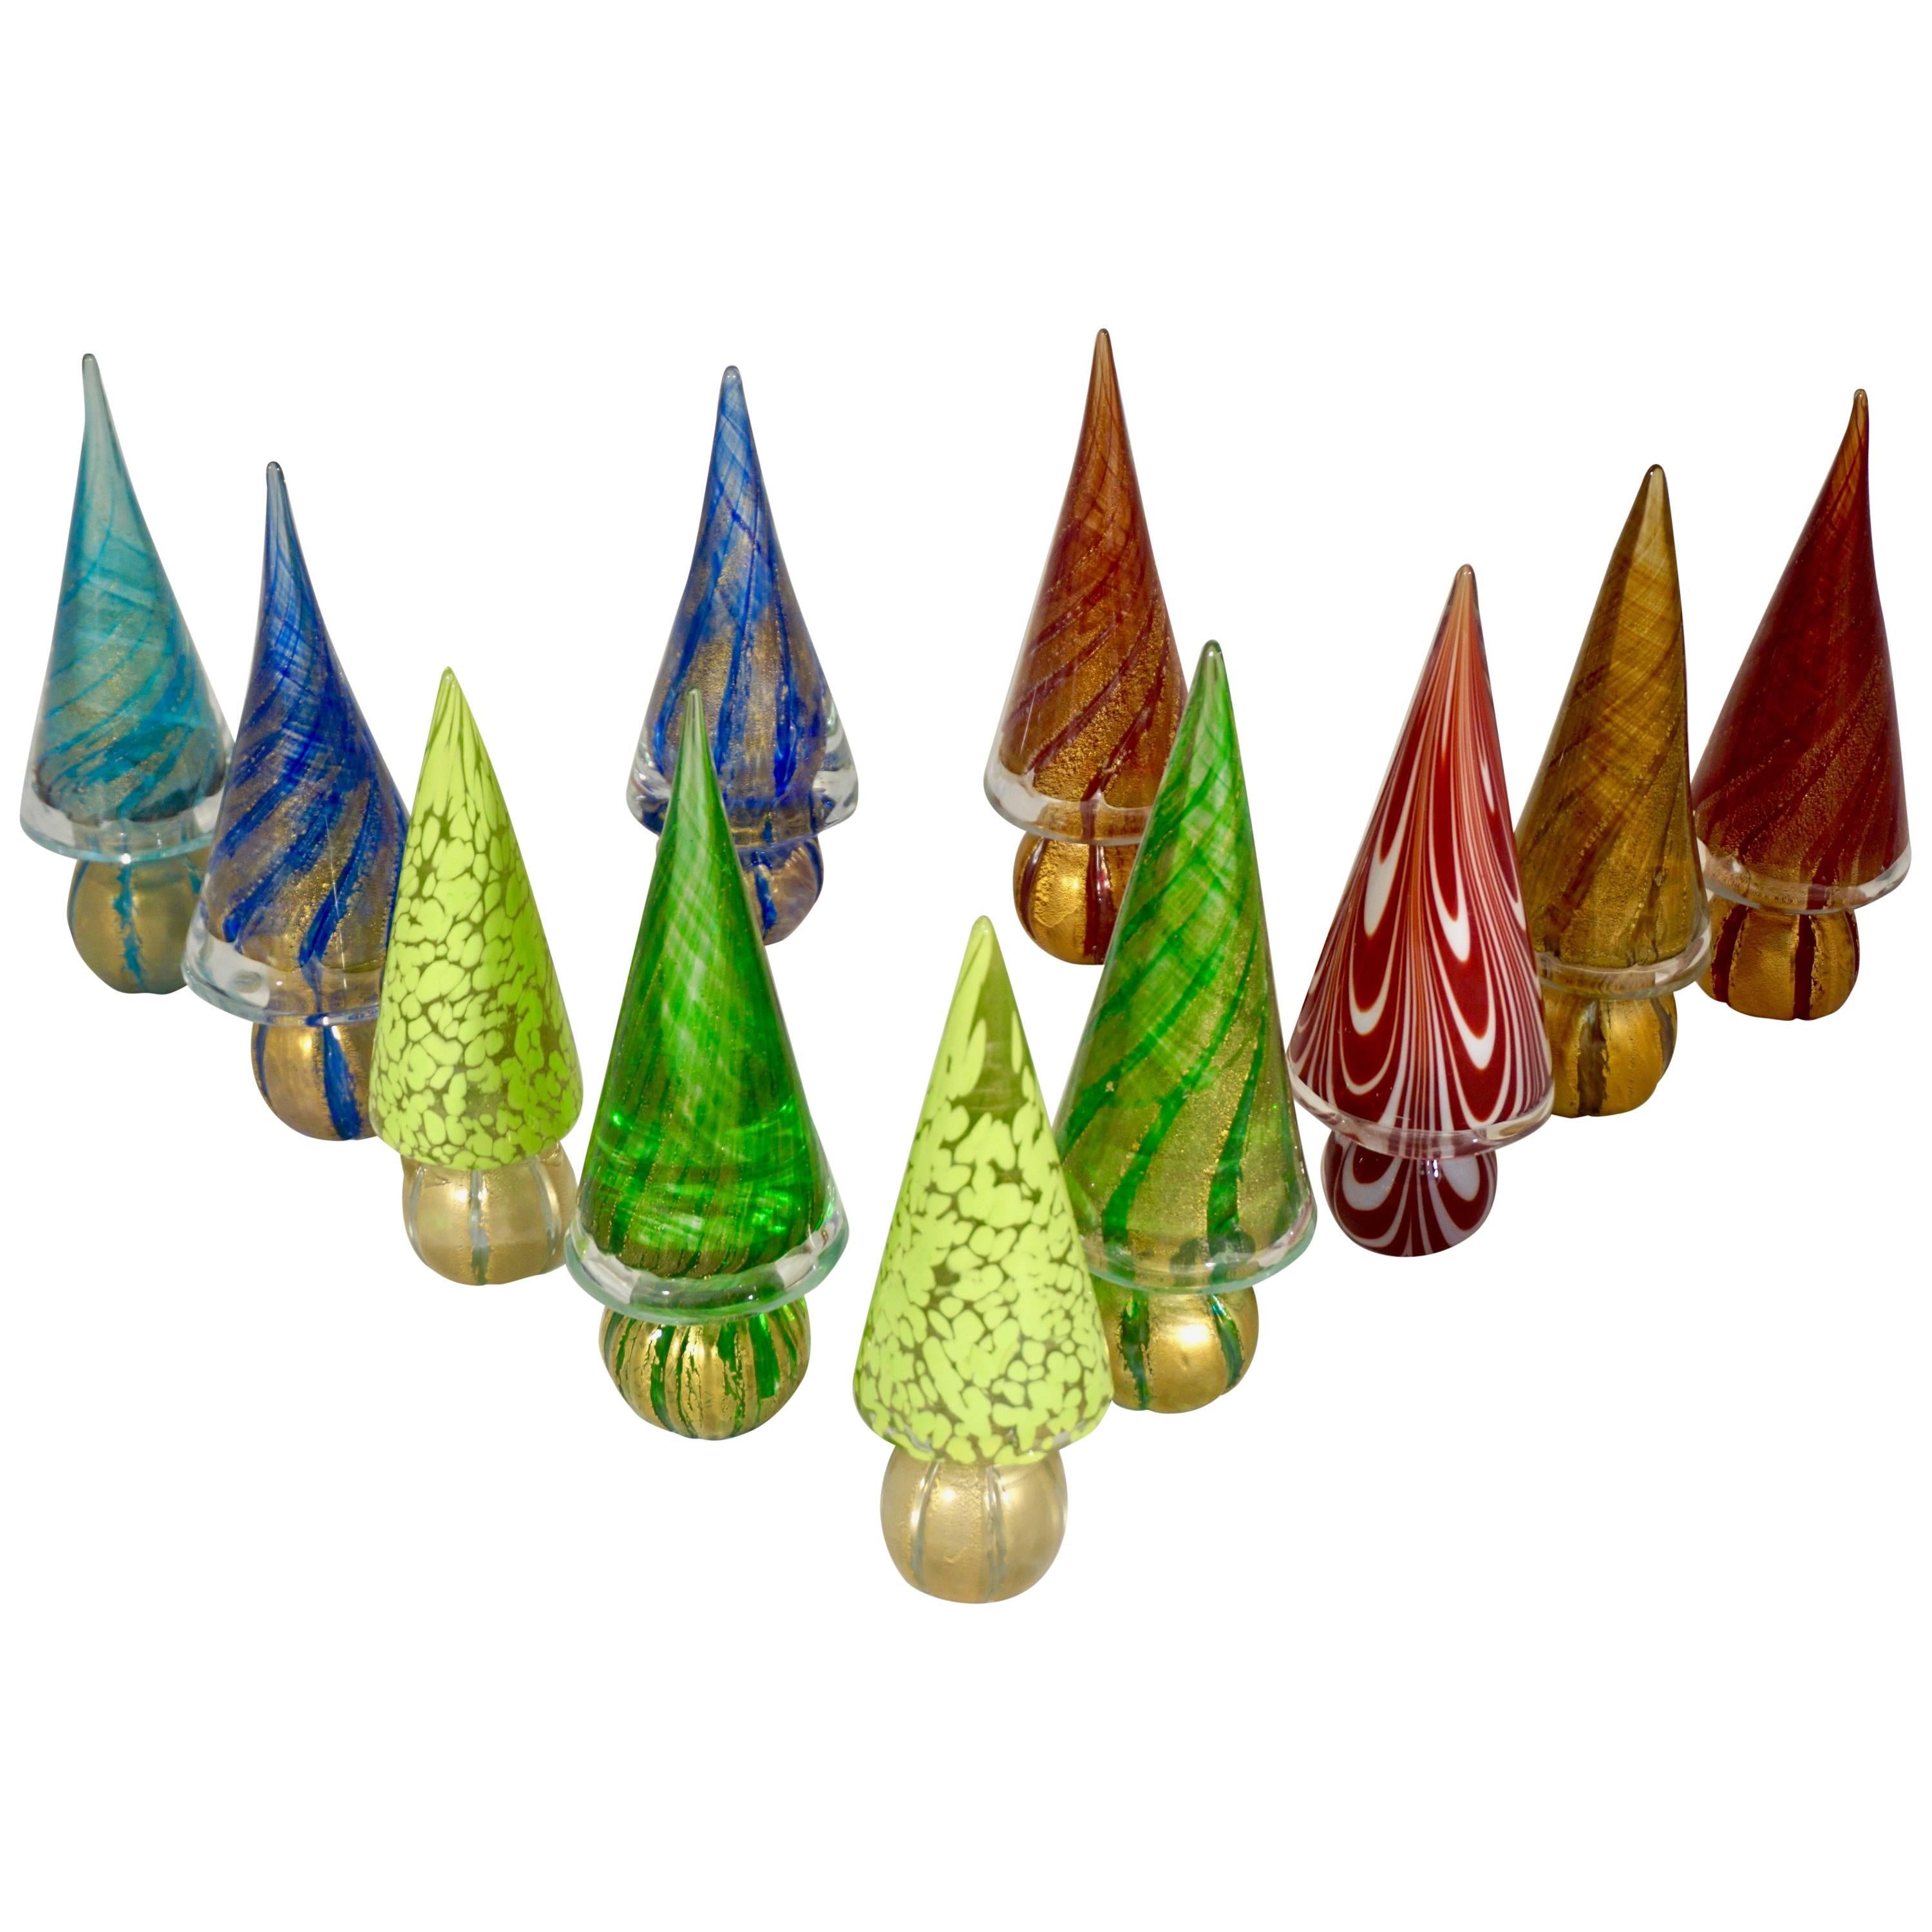 Formia 1980s Italian Vintage Colorful Murano Glass Christmas Tree Sculptures